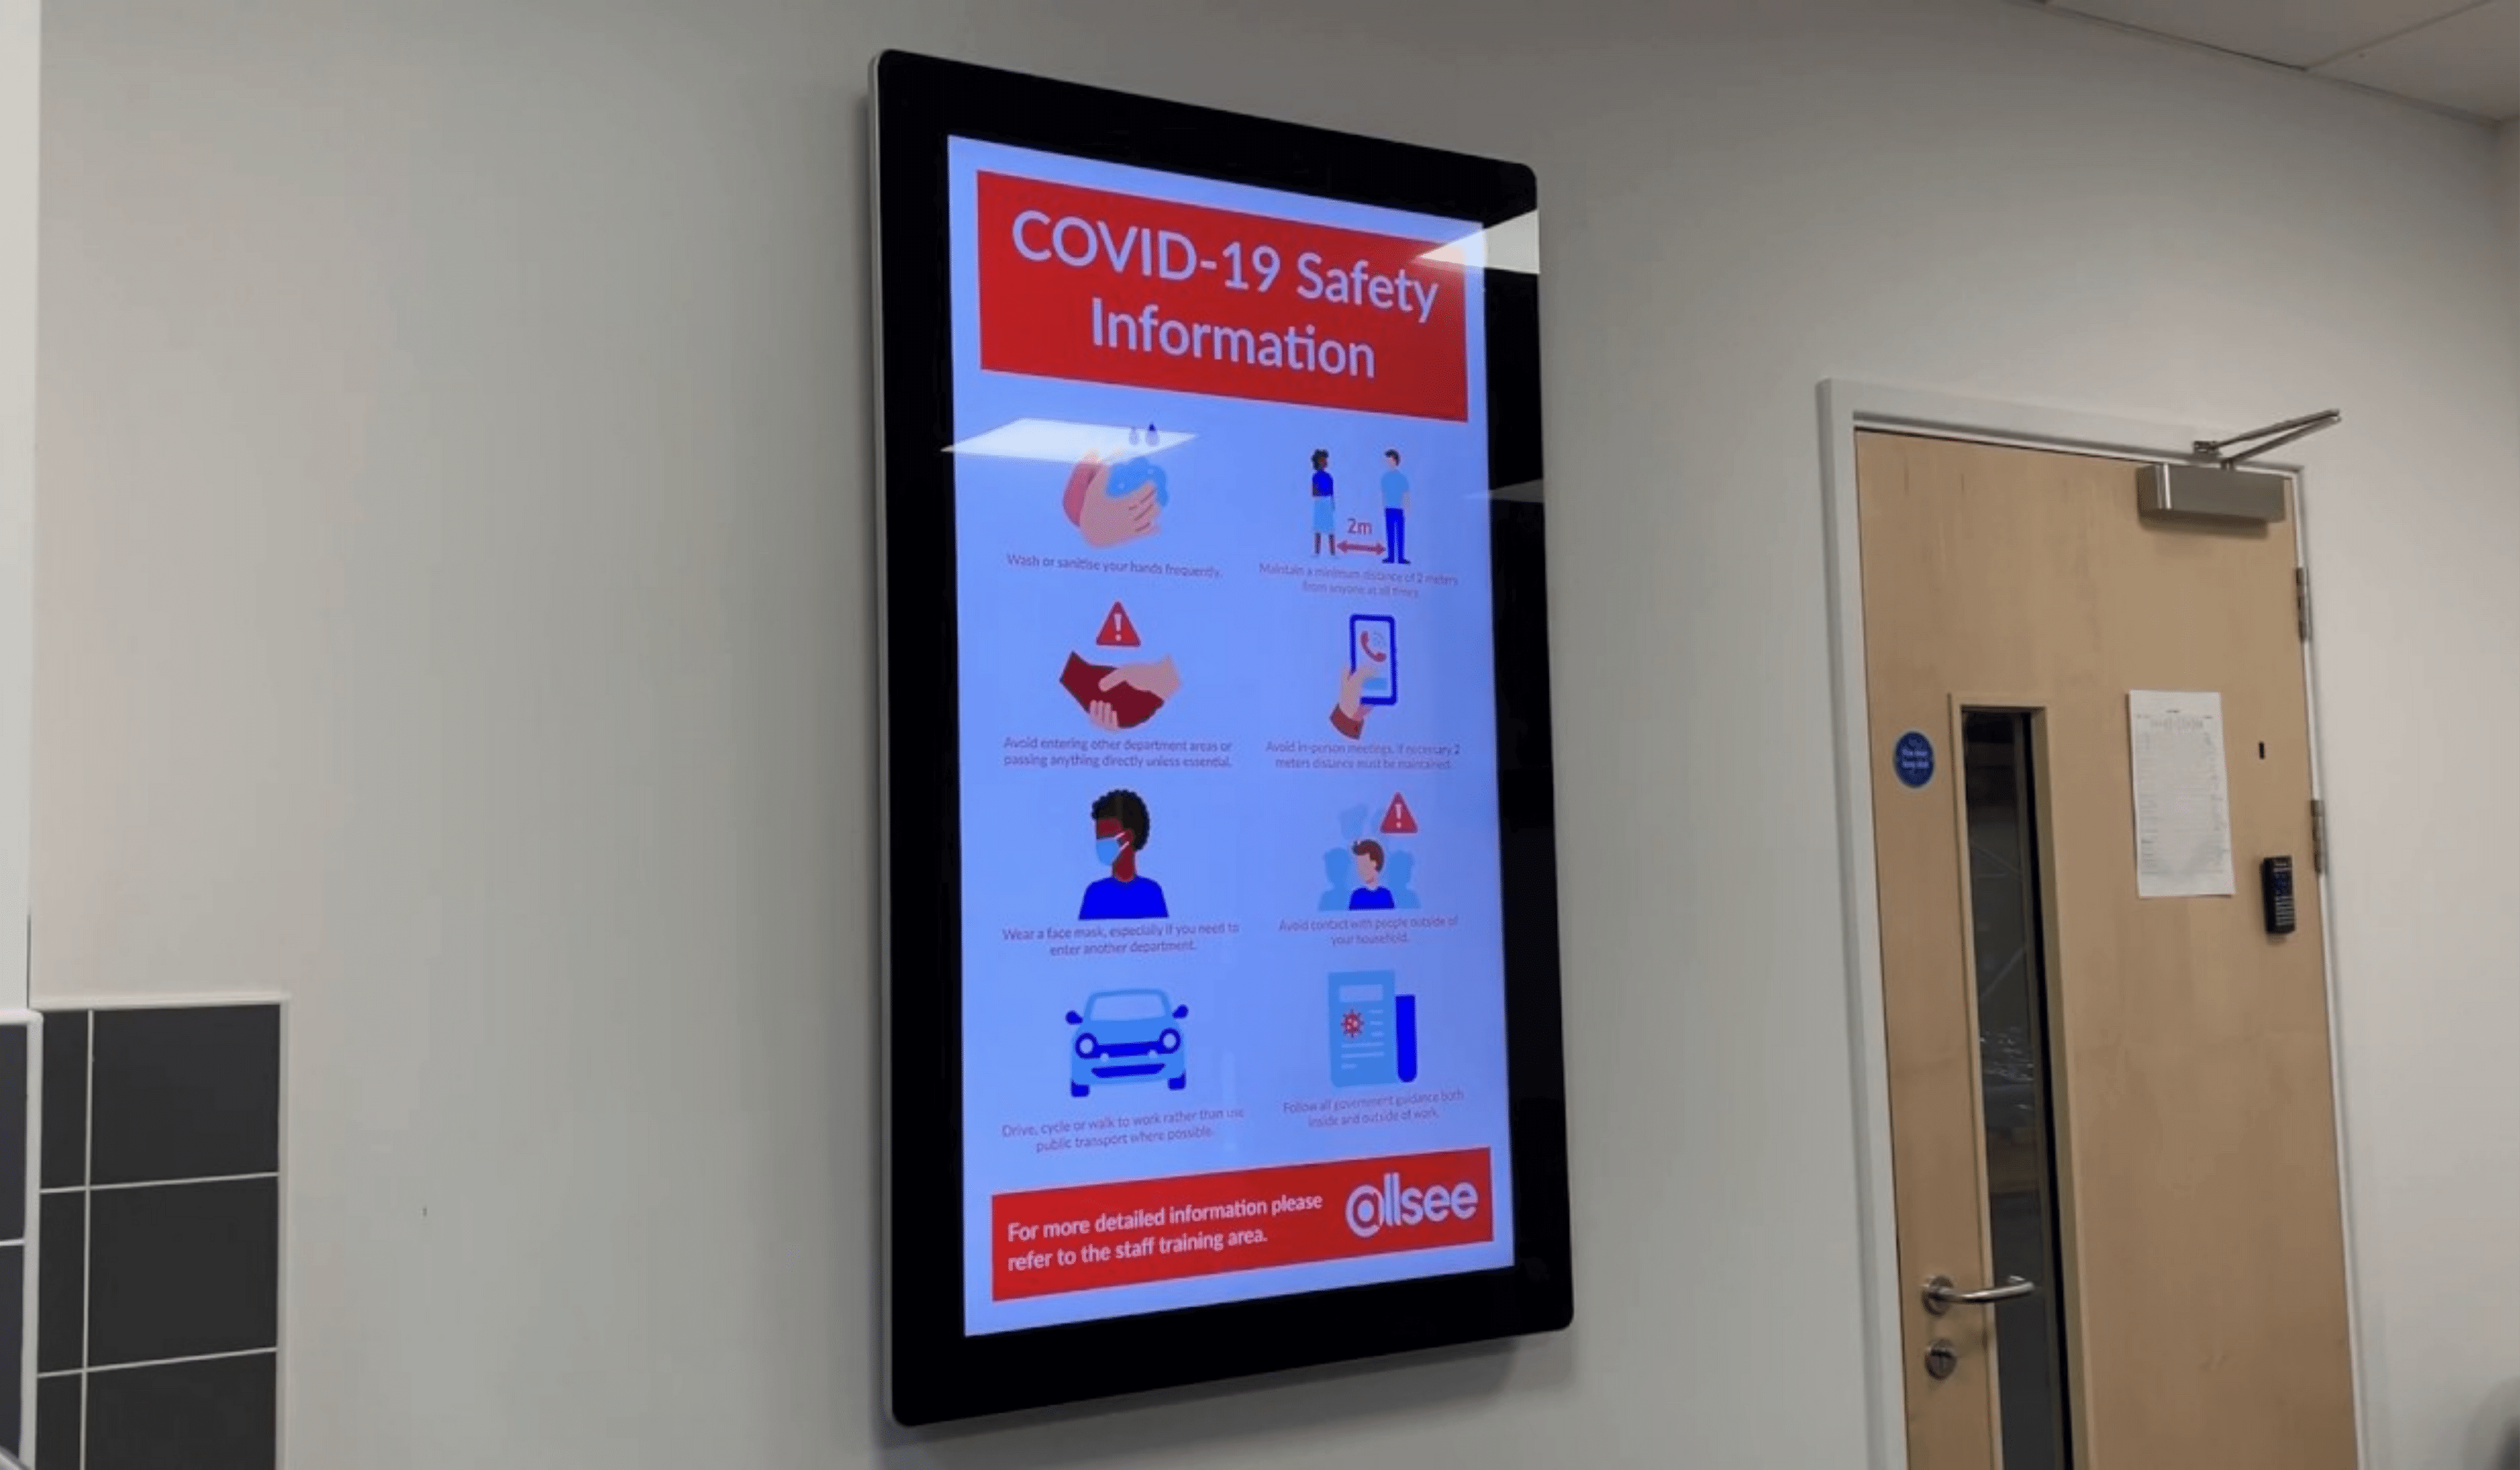 Digital signage safety posters